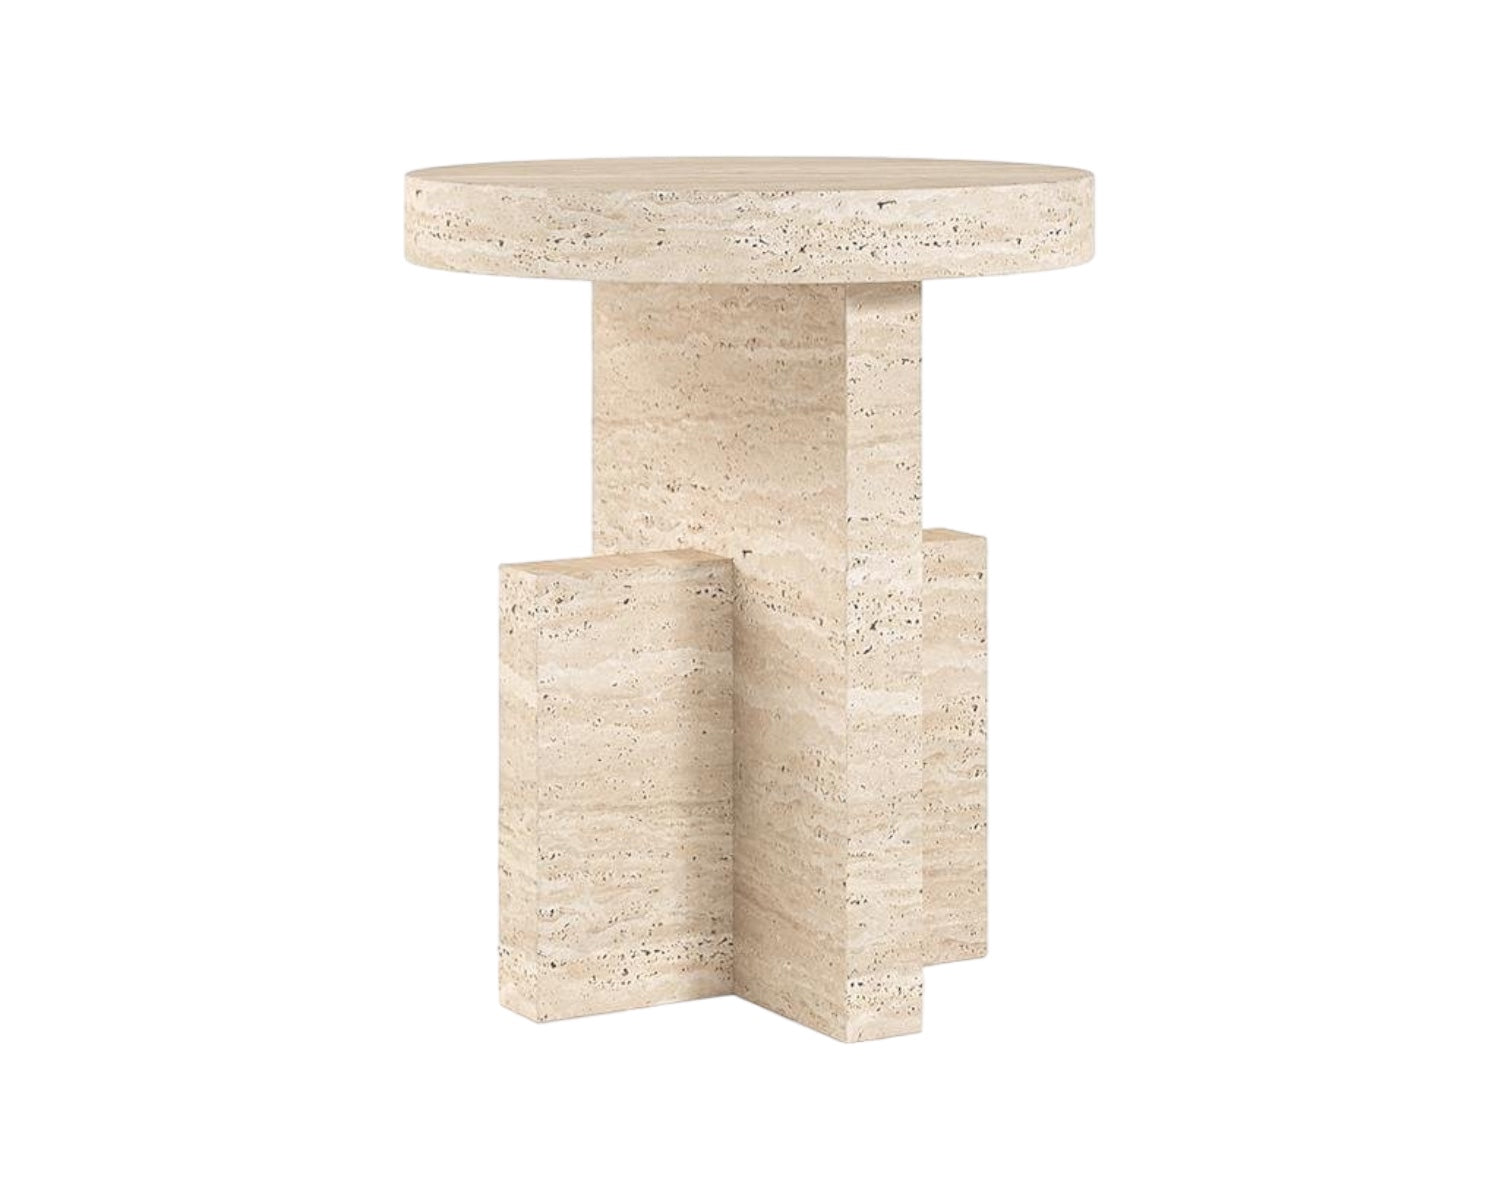 LEXI HAND CRAFTED ORGANIC TRAVERTINE SIDE TABLE